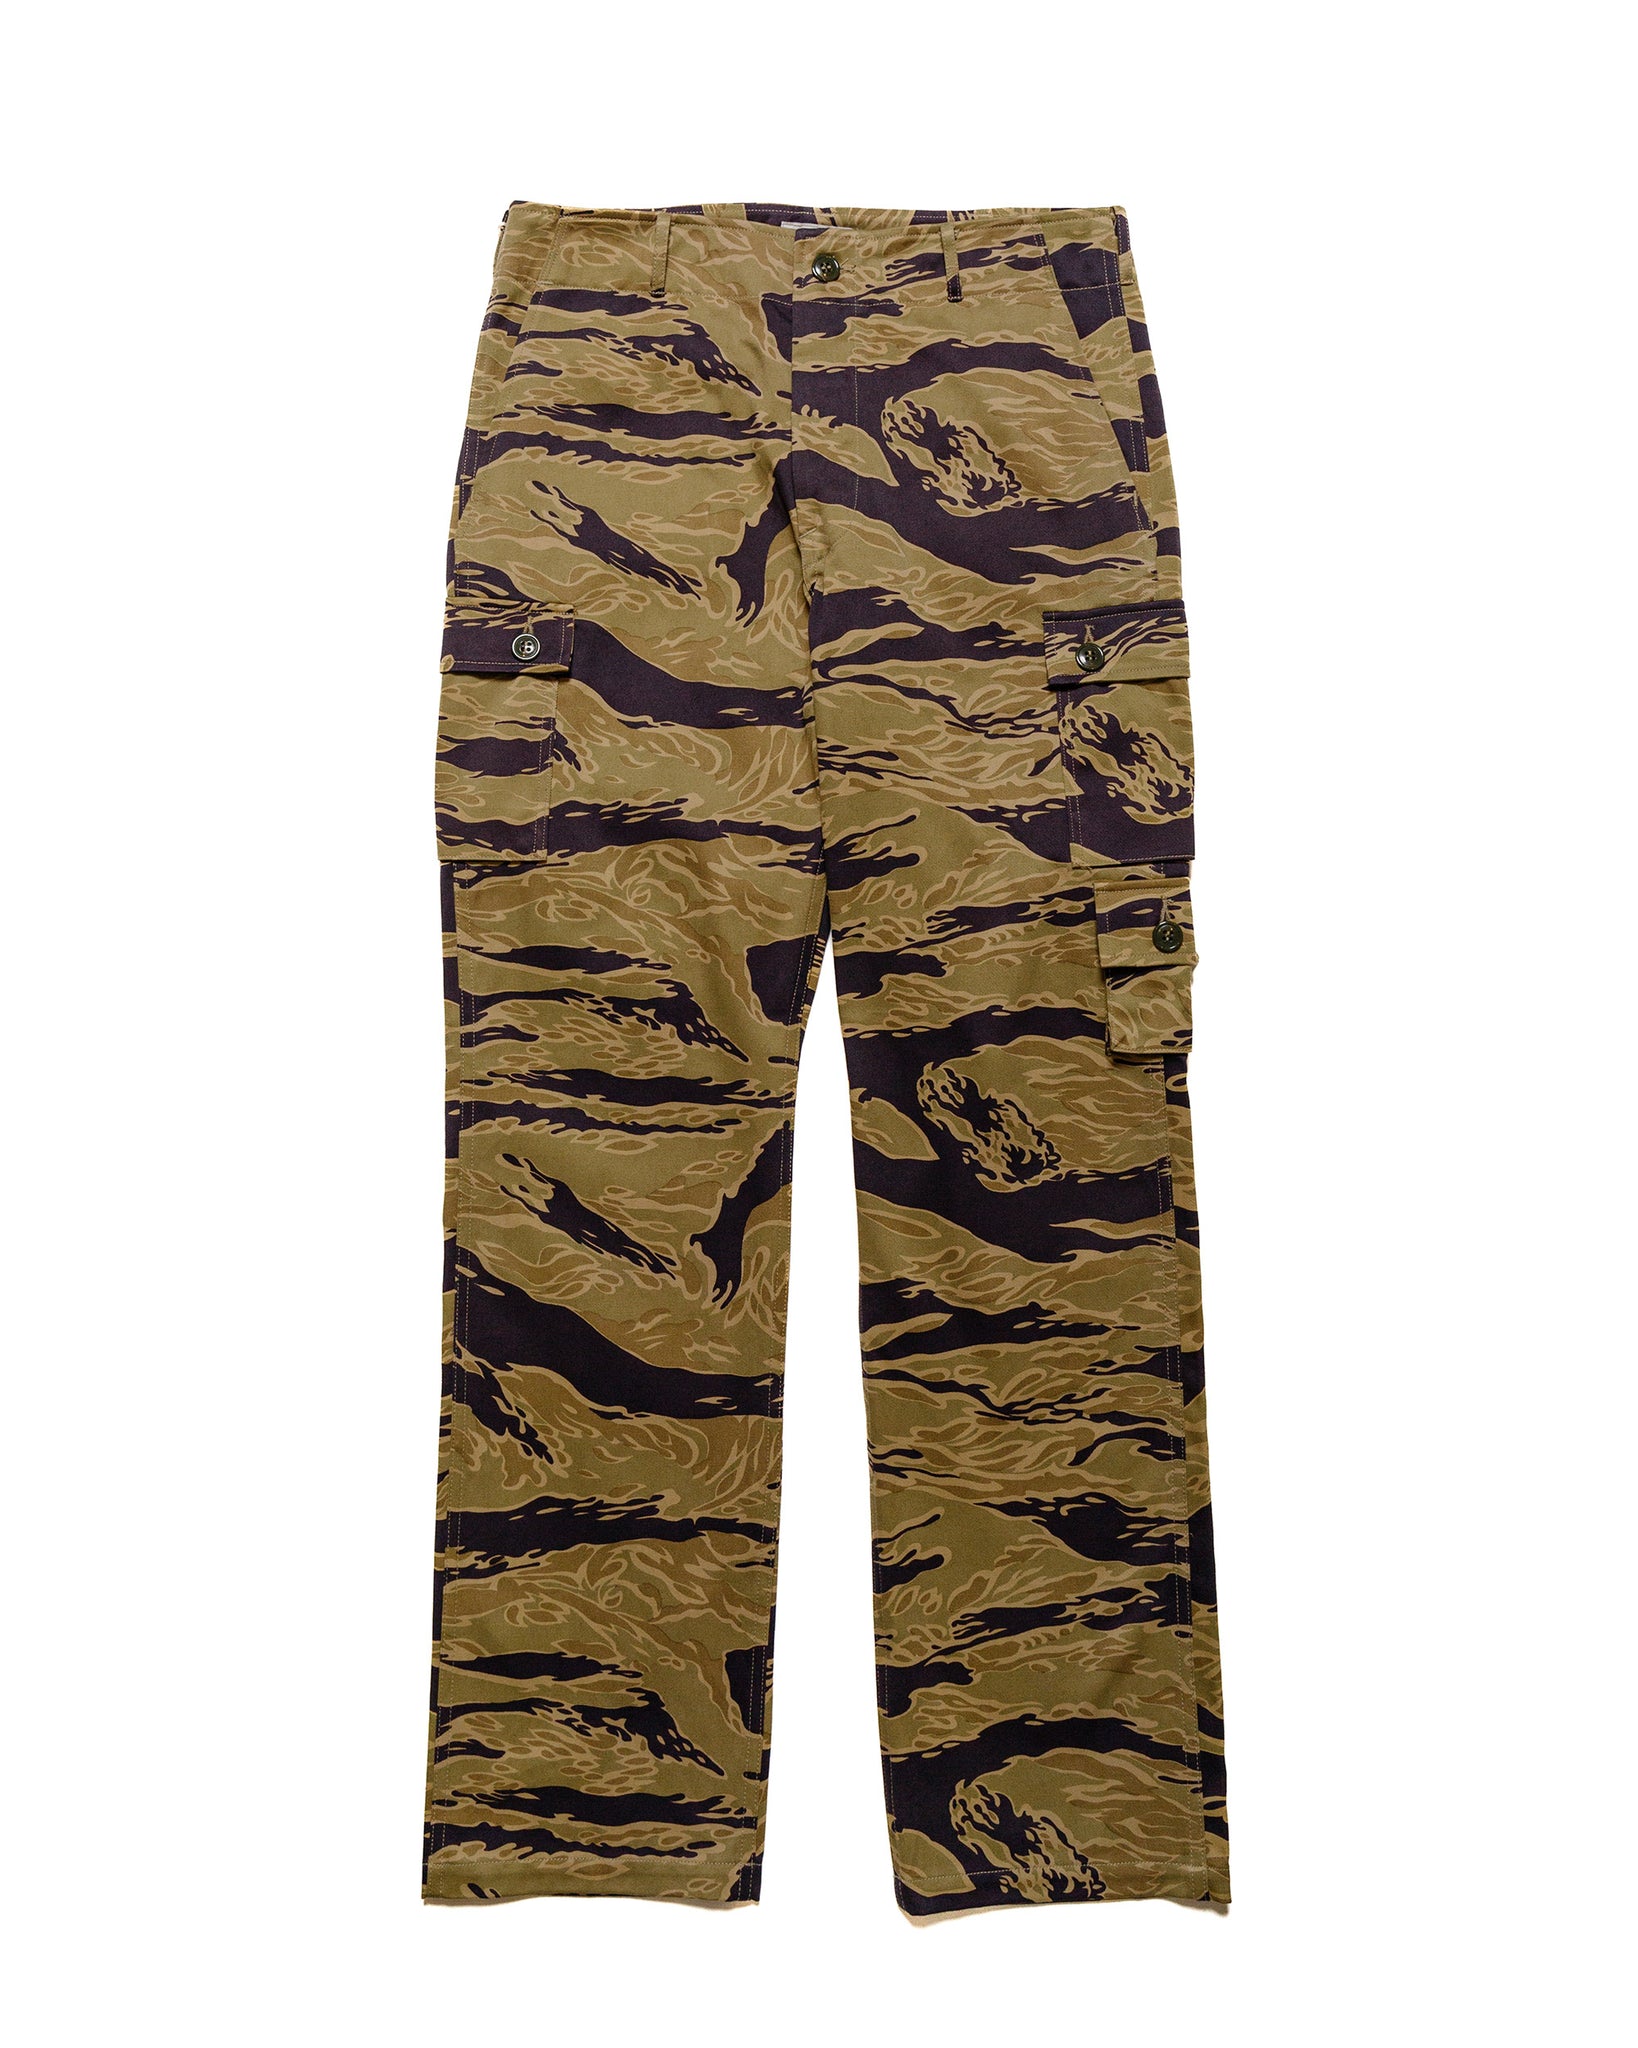 The Real McCoy's MP24001 Tiger Camouflage Trousers  Advisor Khaki